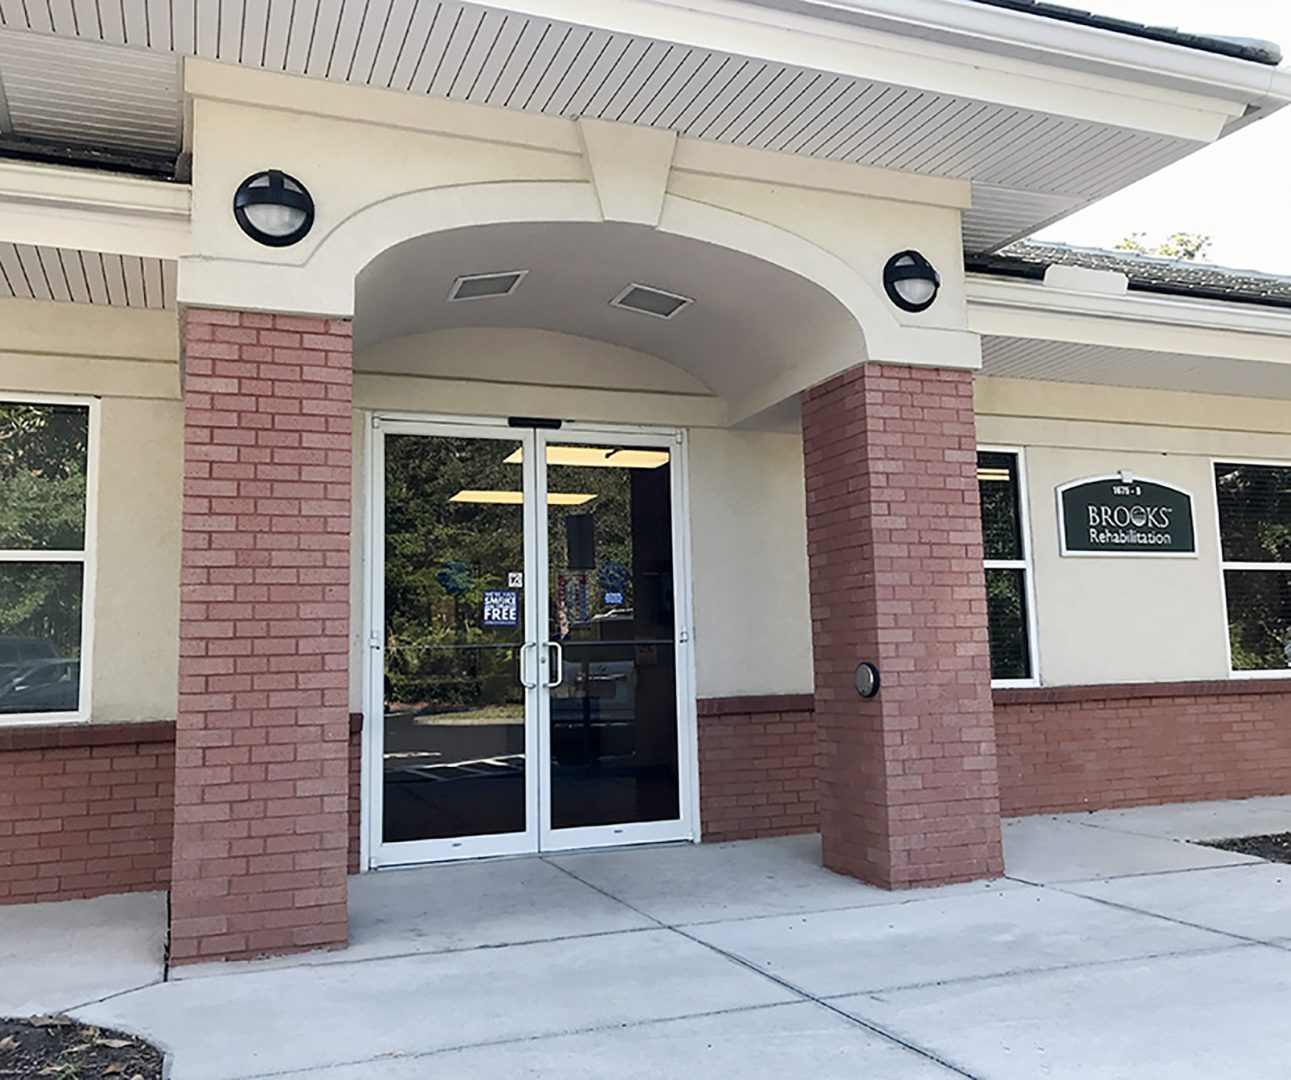 Outpatient – Fleming Island